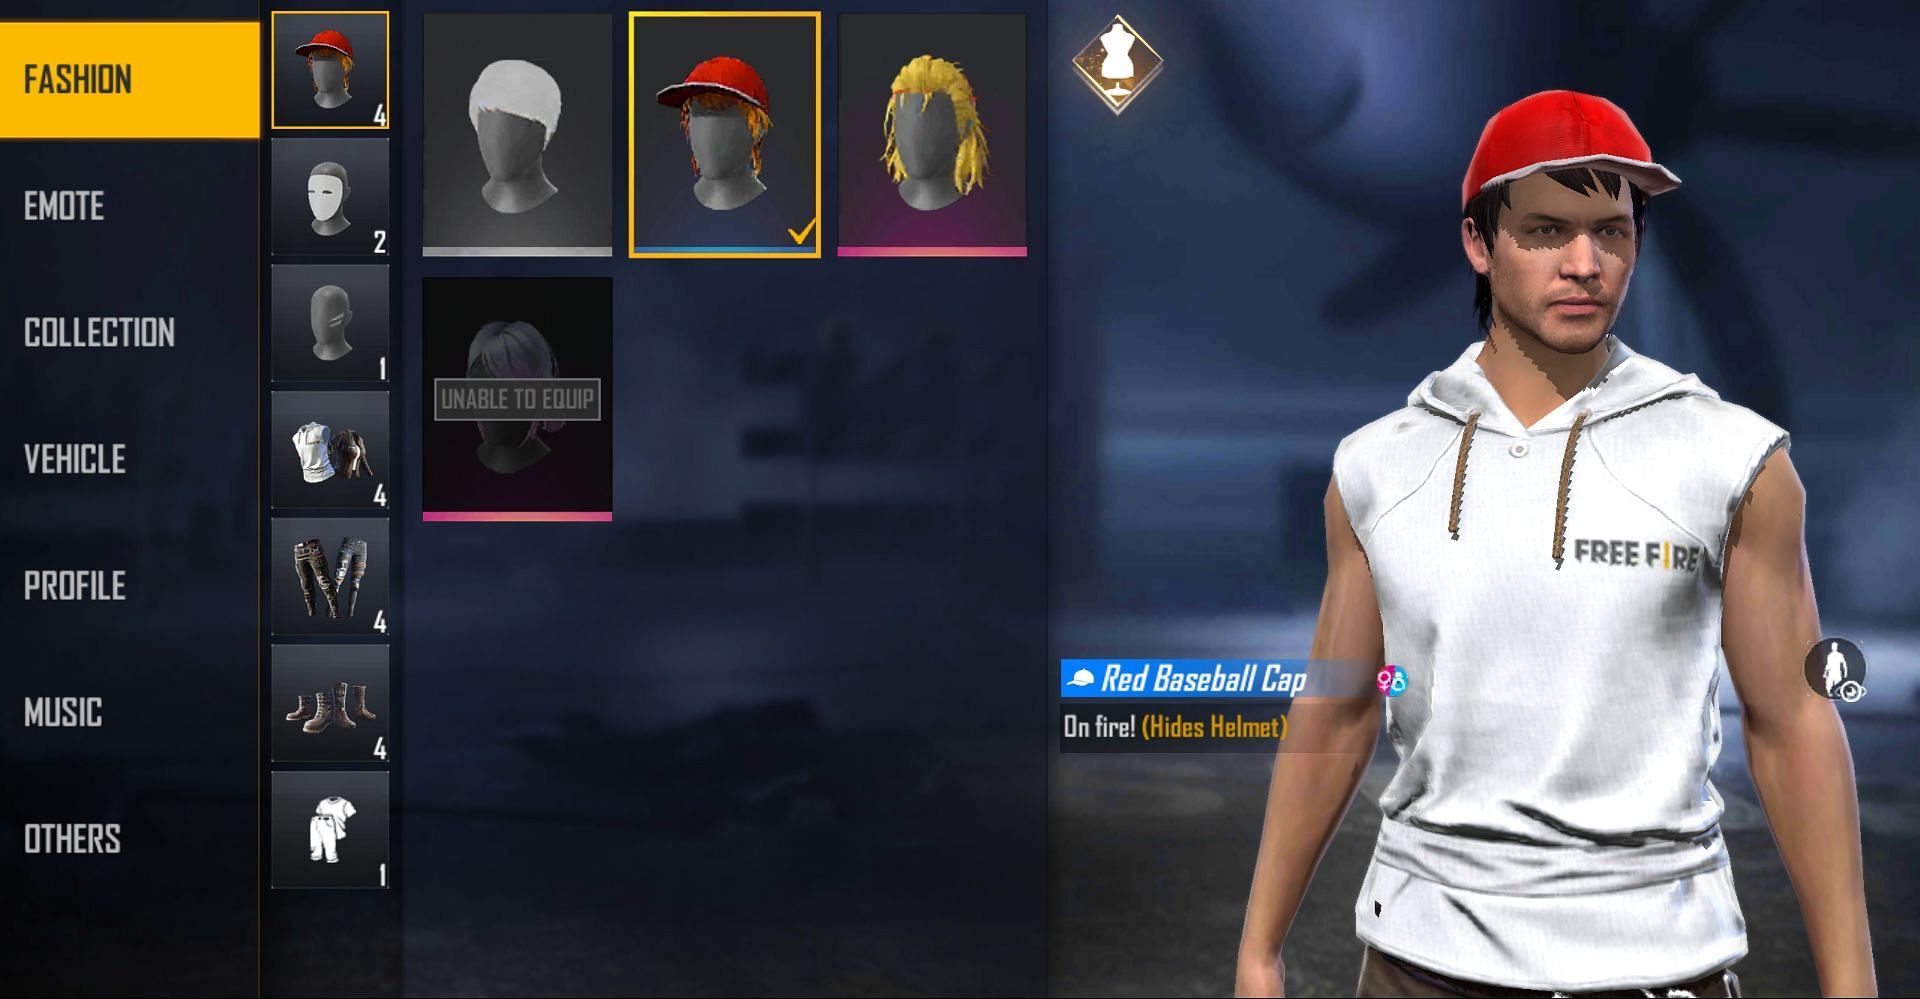 This is the Red Baseball Cap (Image via Garena)